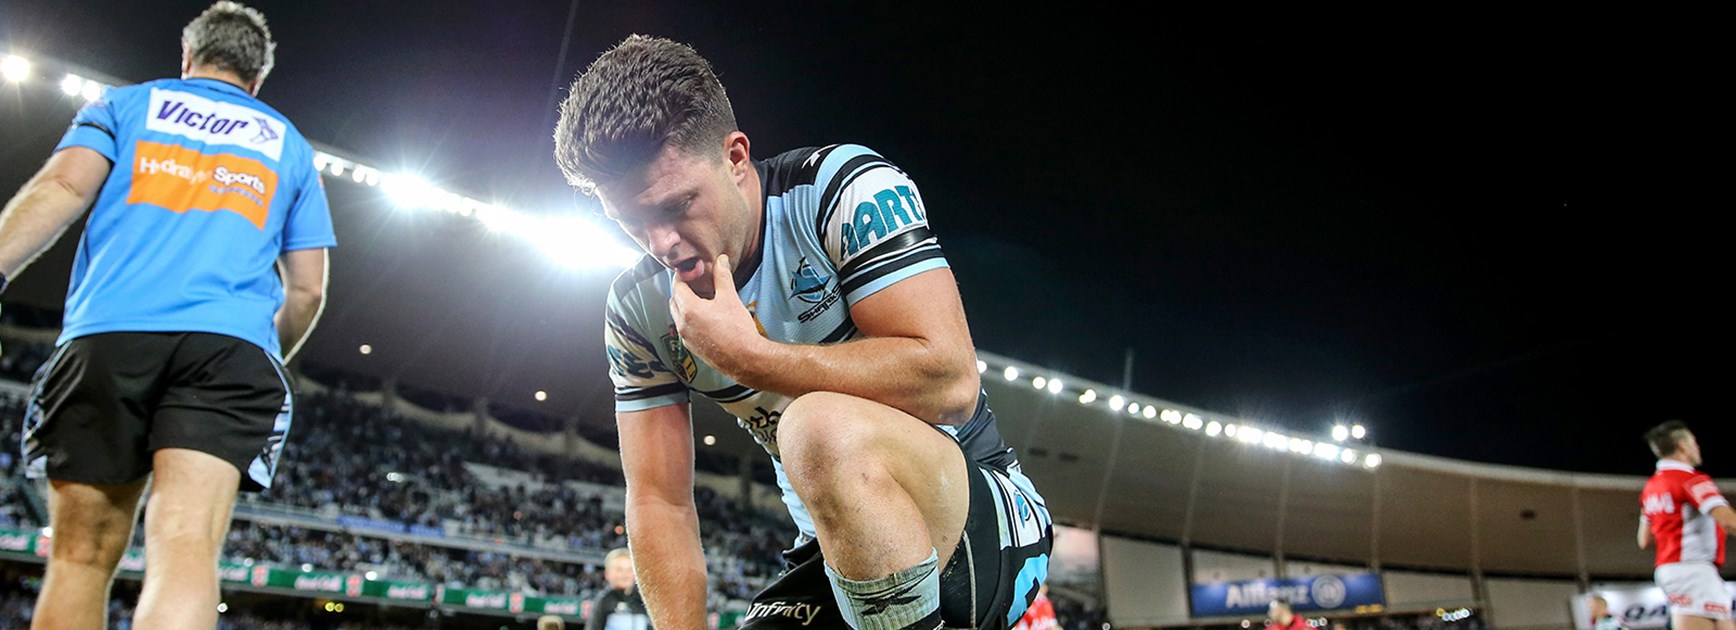 Sharks halfback Chad Townsend was overcome with emotion at full-time in the preliminary final against the Cowboys.